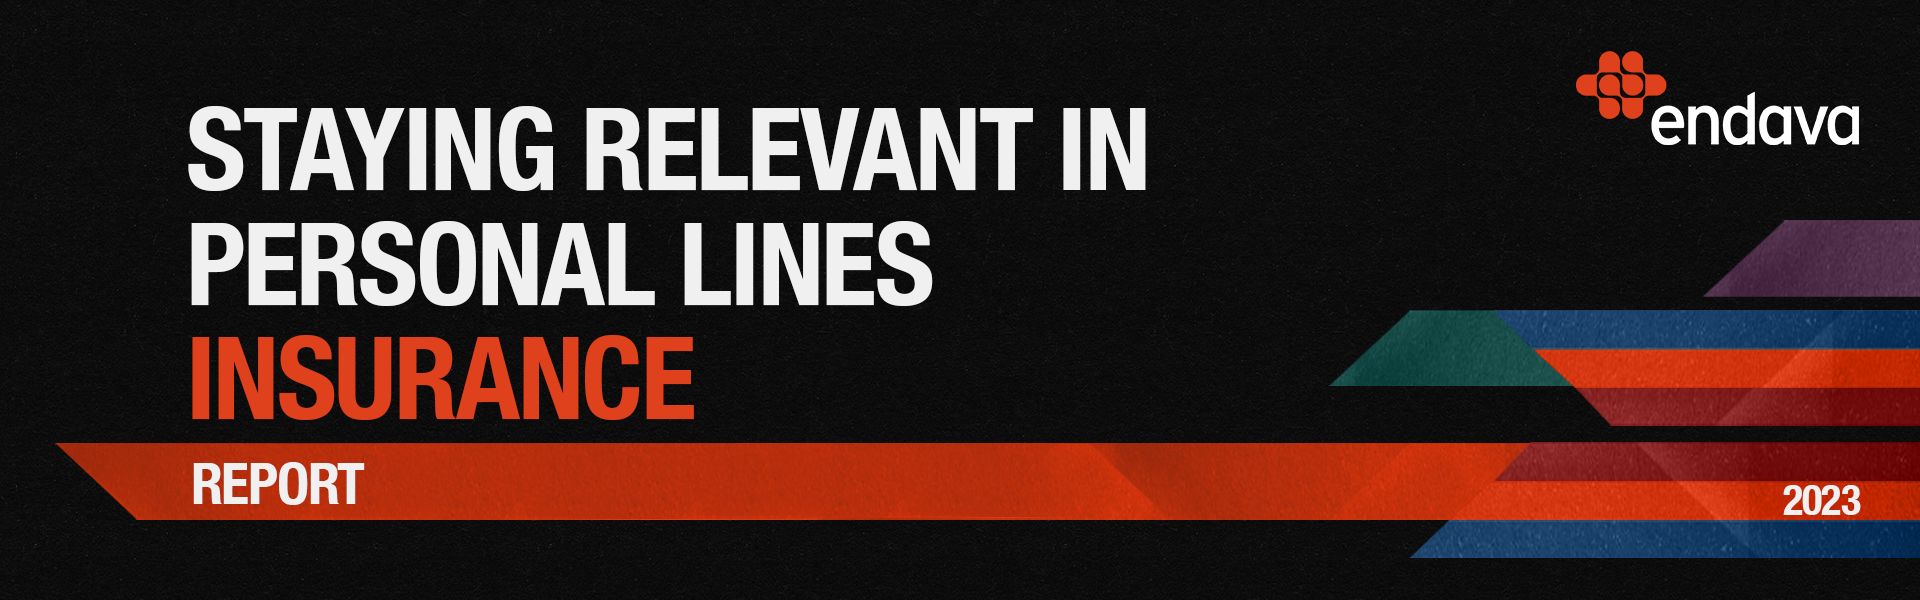 Staying relevant Hubspot Banner